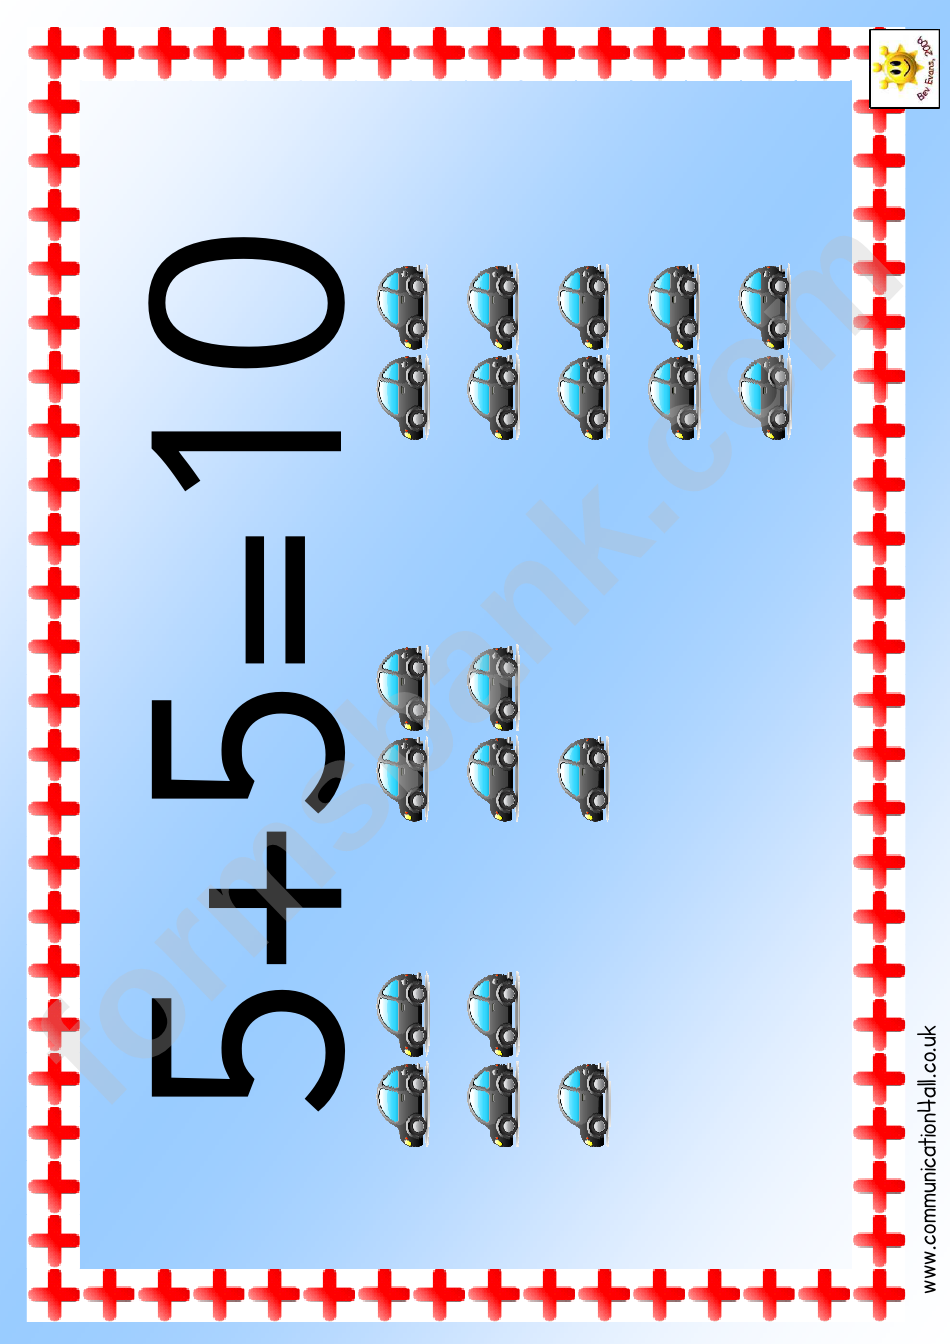 Vehicle Counting Number Chart - 0-10